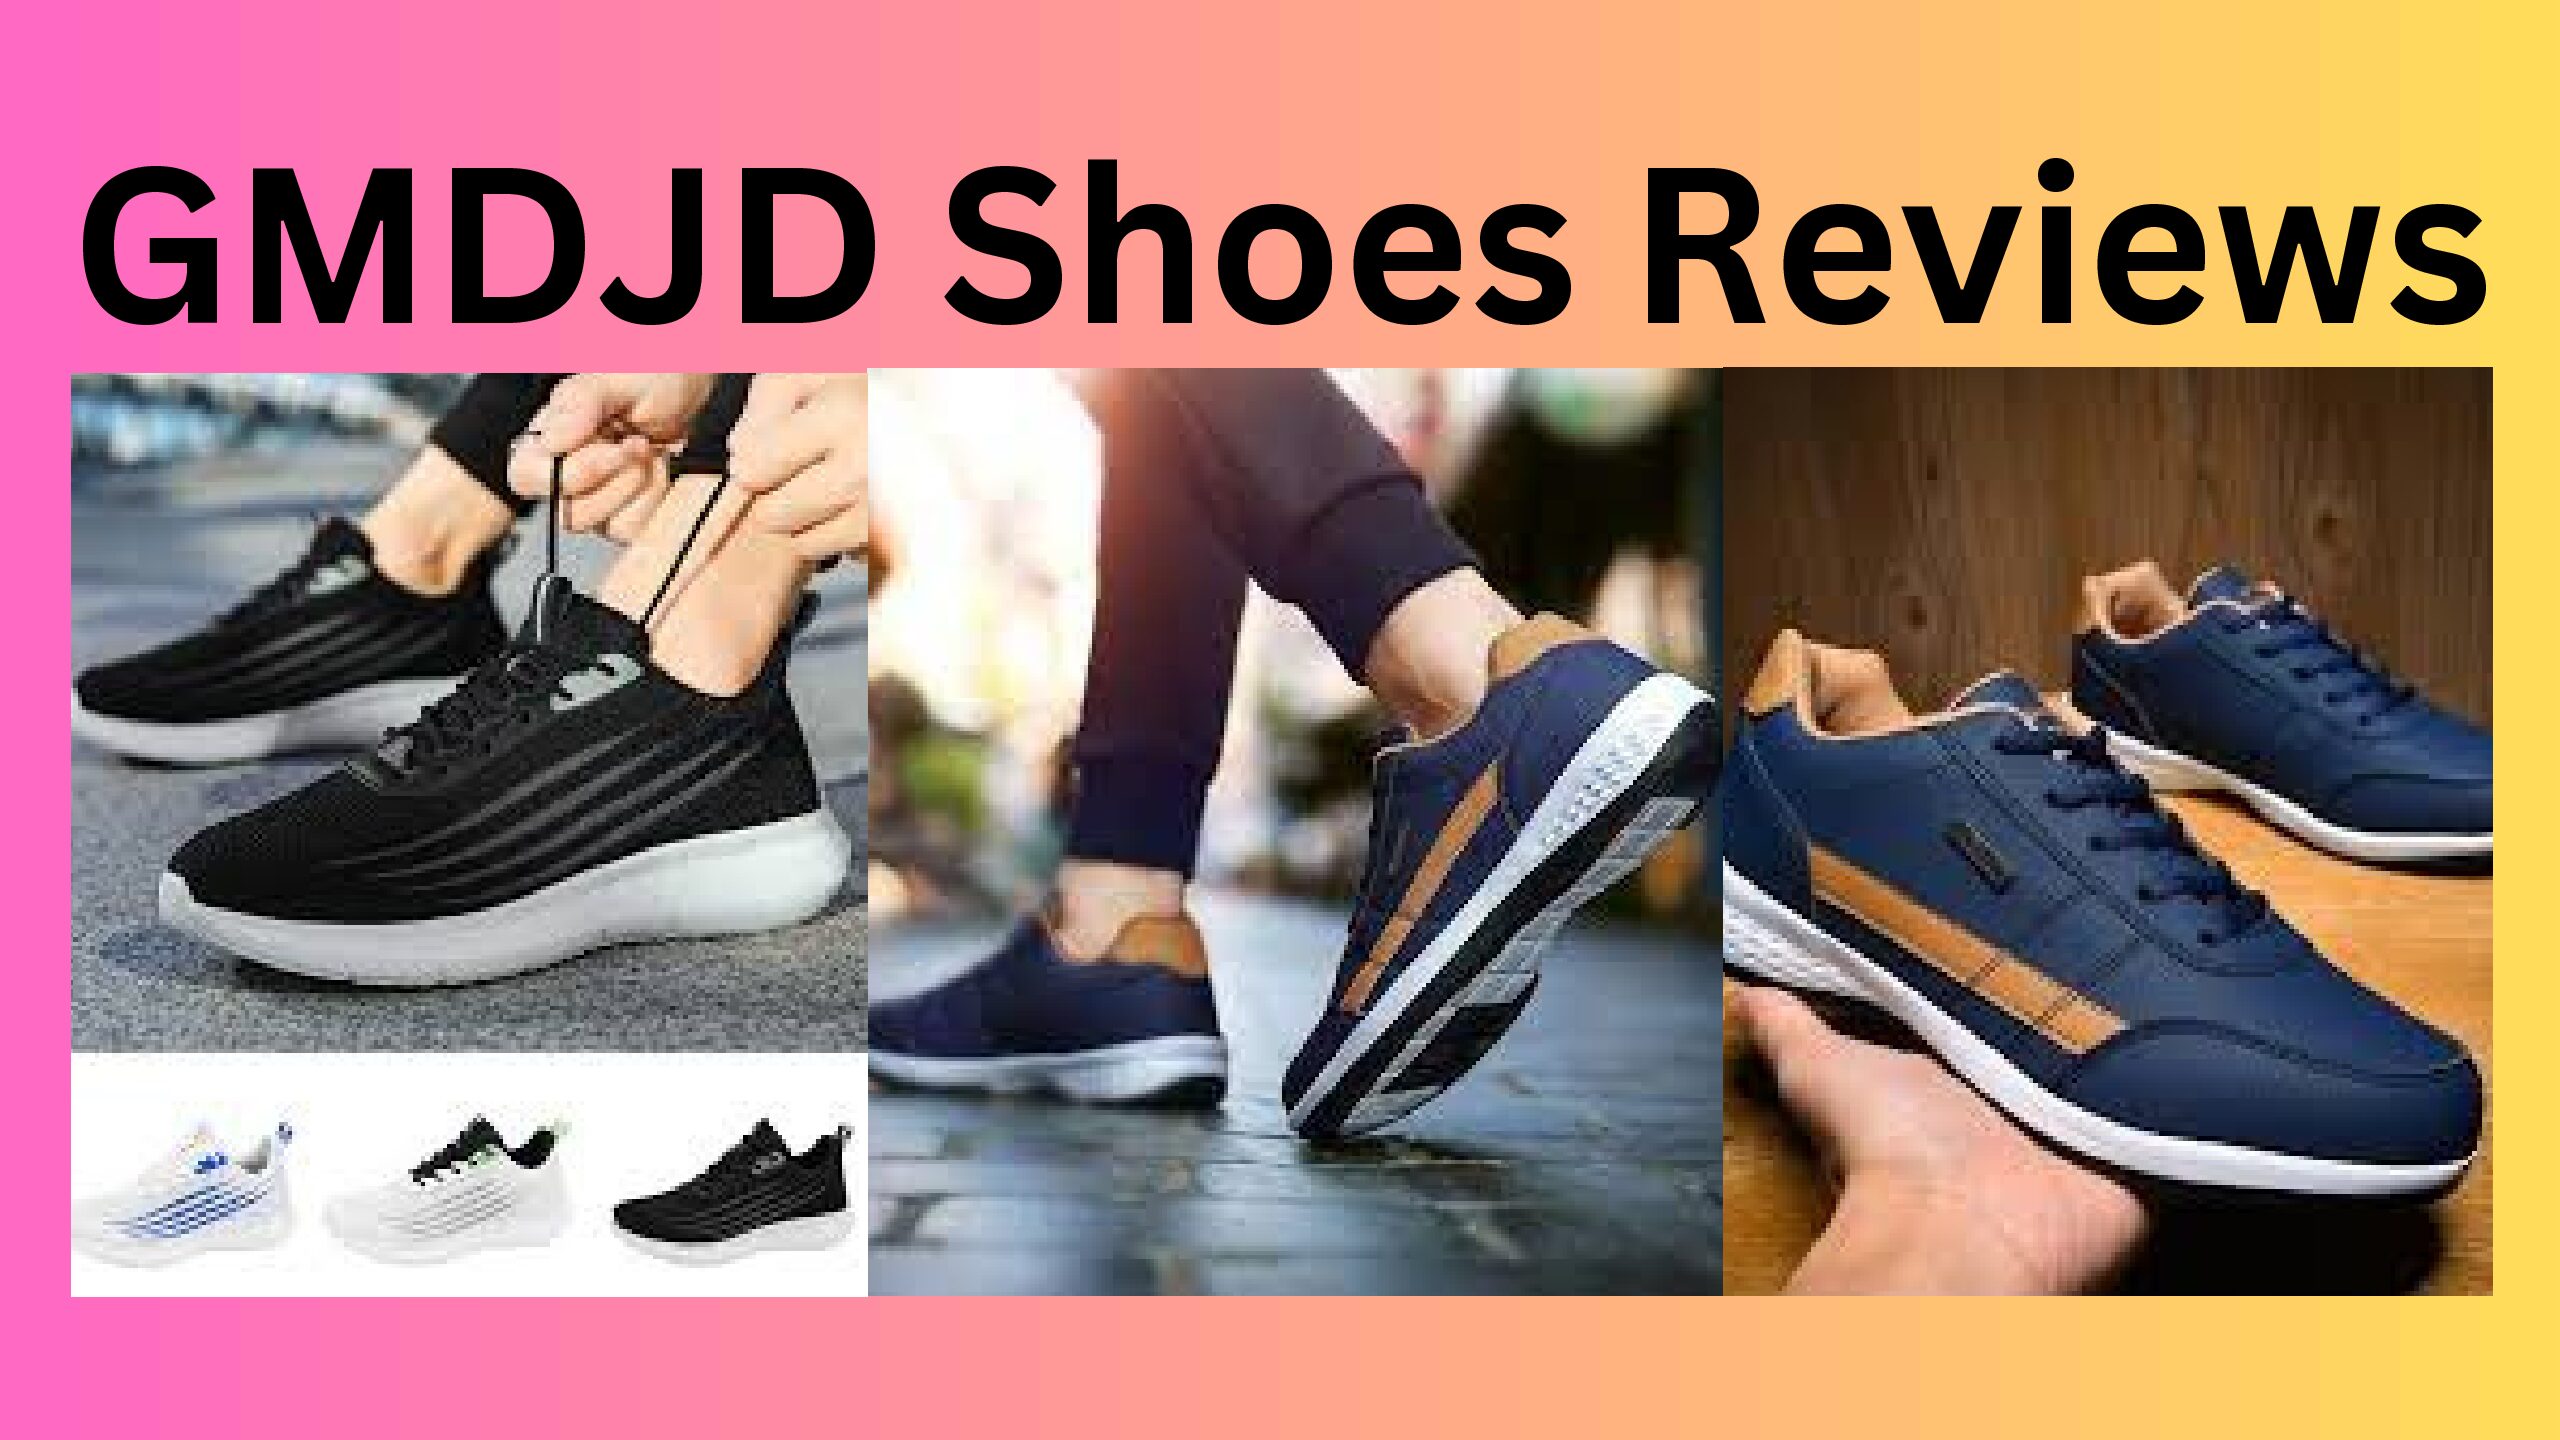 GMDJD Shoes Reviews: Don’t Buy Them Until You Read This!